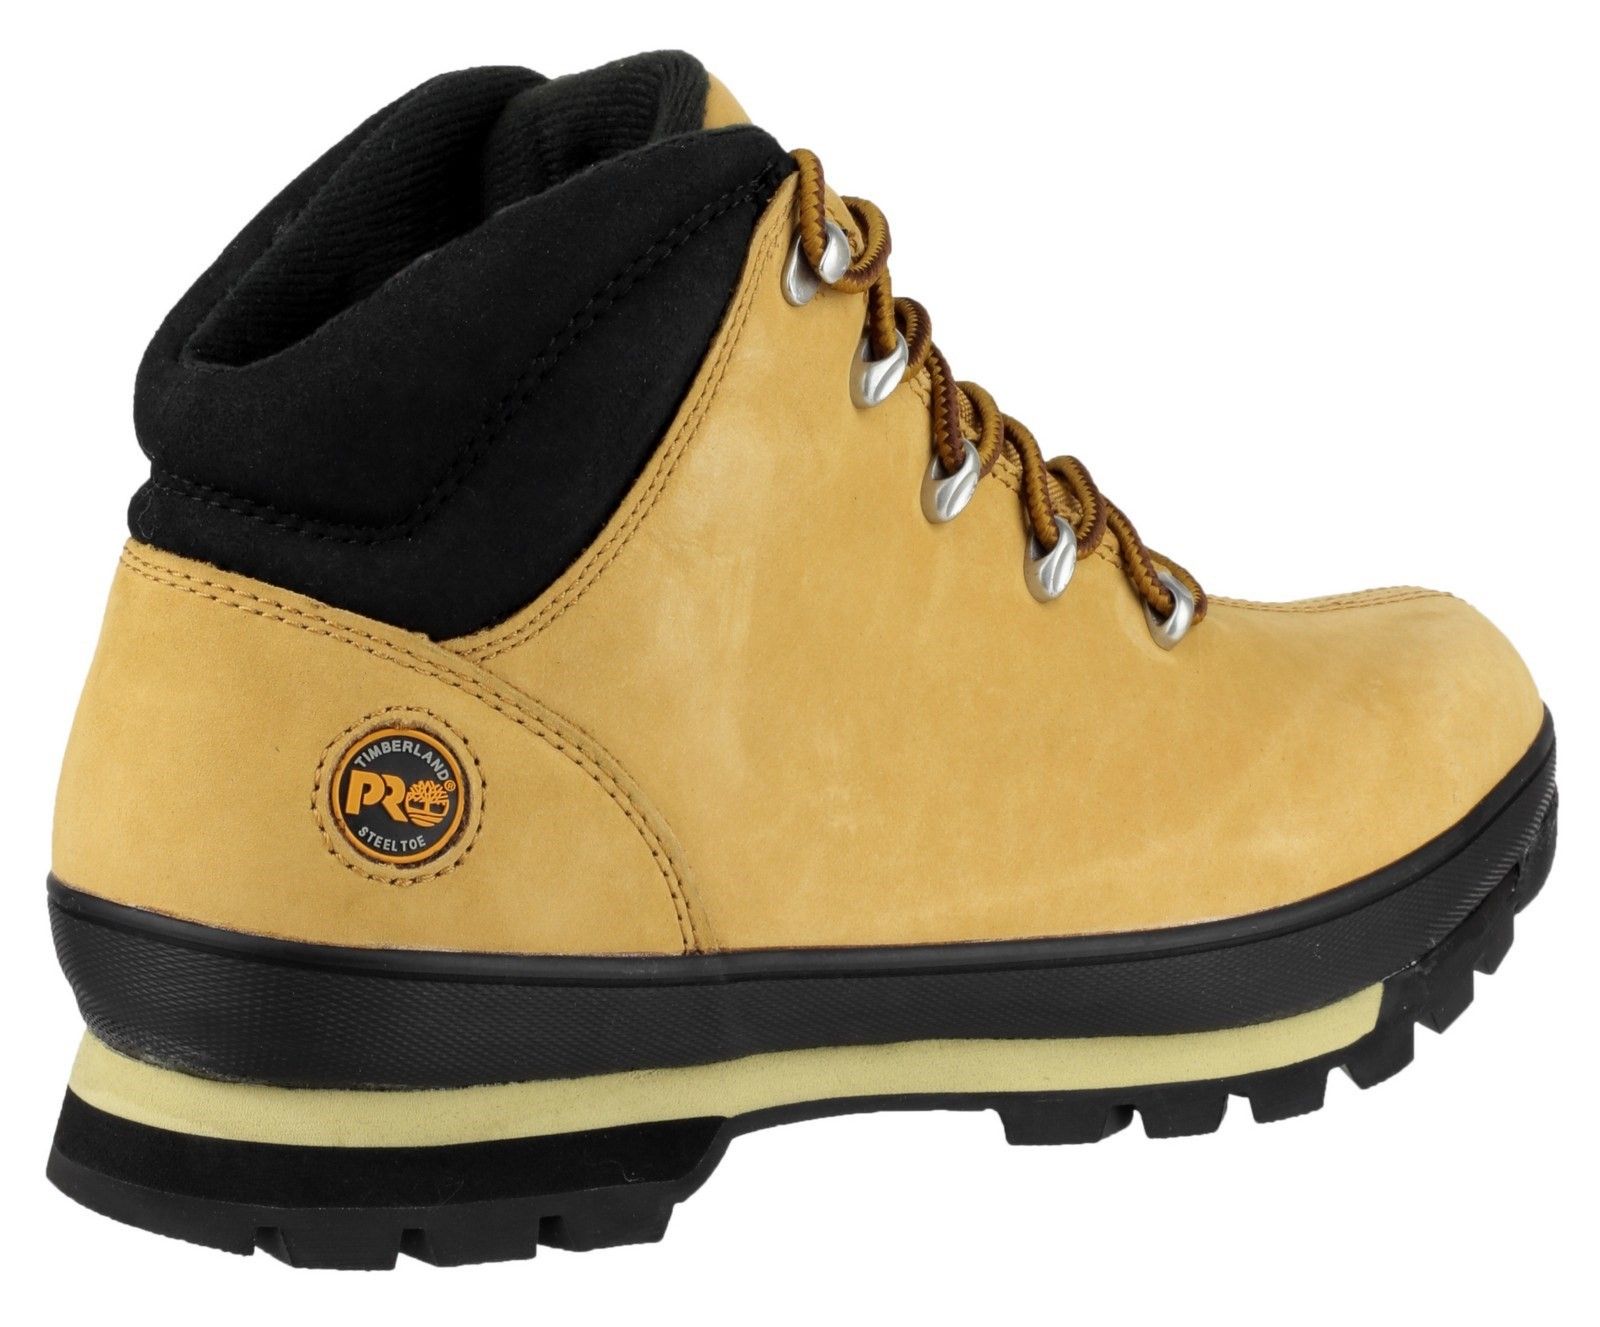 The Timberland PRO Splitrock series offers the best in craftsmanship, safety and classic styling. Featuring rugged materials, durable protection and slip-resistant outsoles for superior performance. Excel on the jobsite with Timberland PRO.Impact and compression resistant toe cap. 
Anti-static with an energy absorbing heel. 
Water resistant oiled nubuck leather upper. 
Penetration resistant midsole for flexible underfoot protection. 
High heat resistant to 300 degrees.